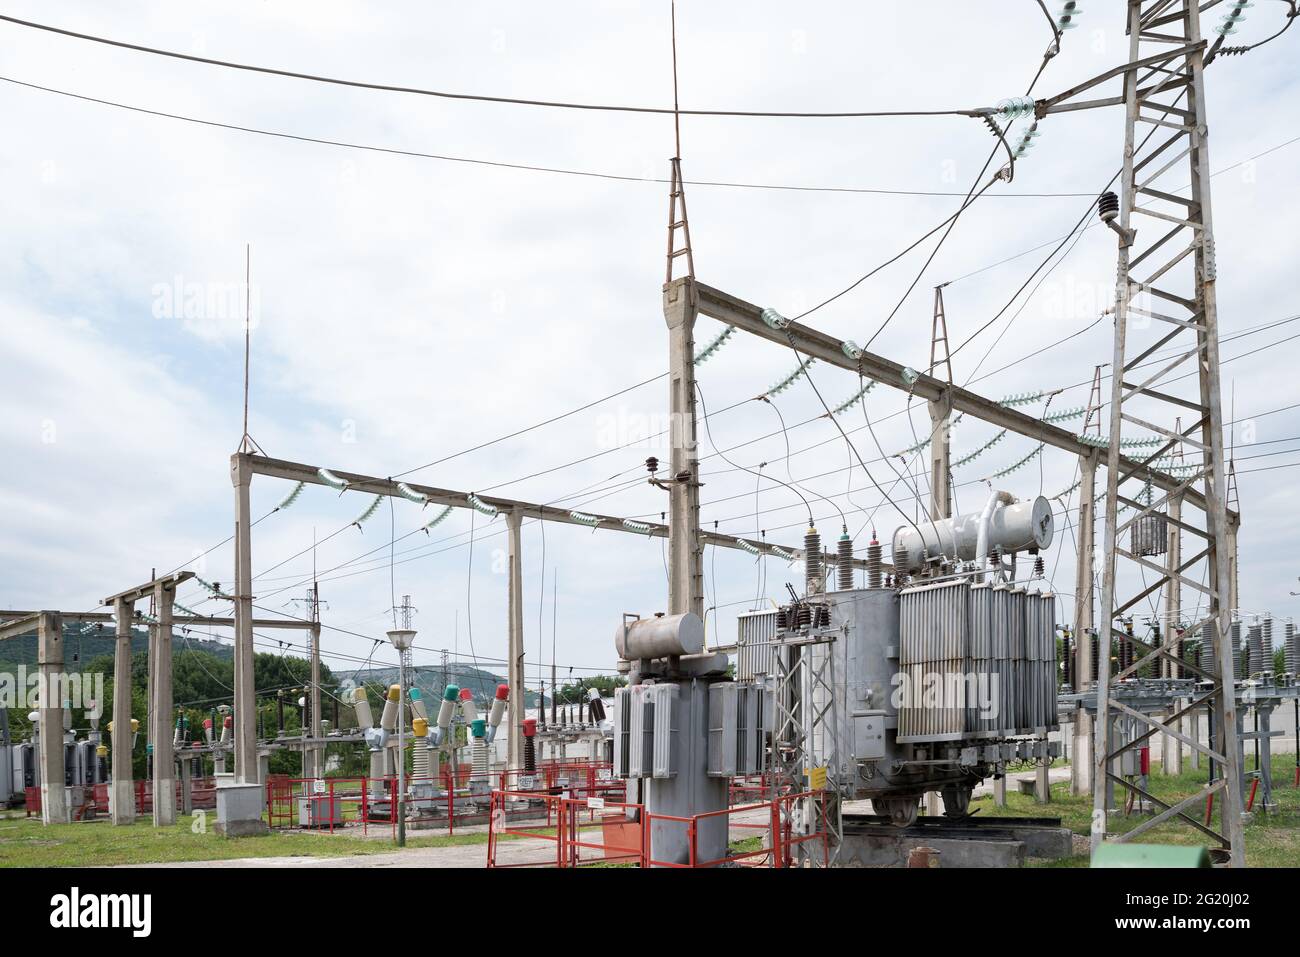 Substation. Transform voltage from high to low. Stock Photo